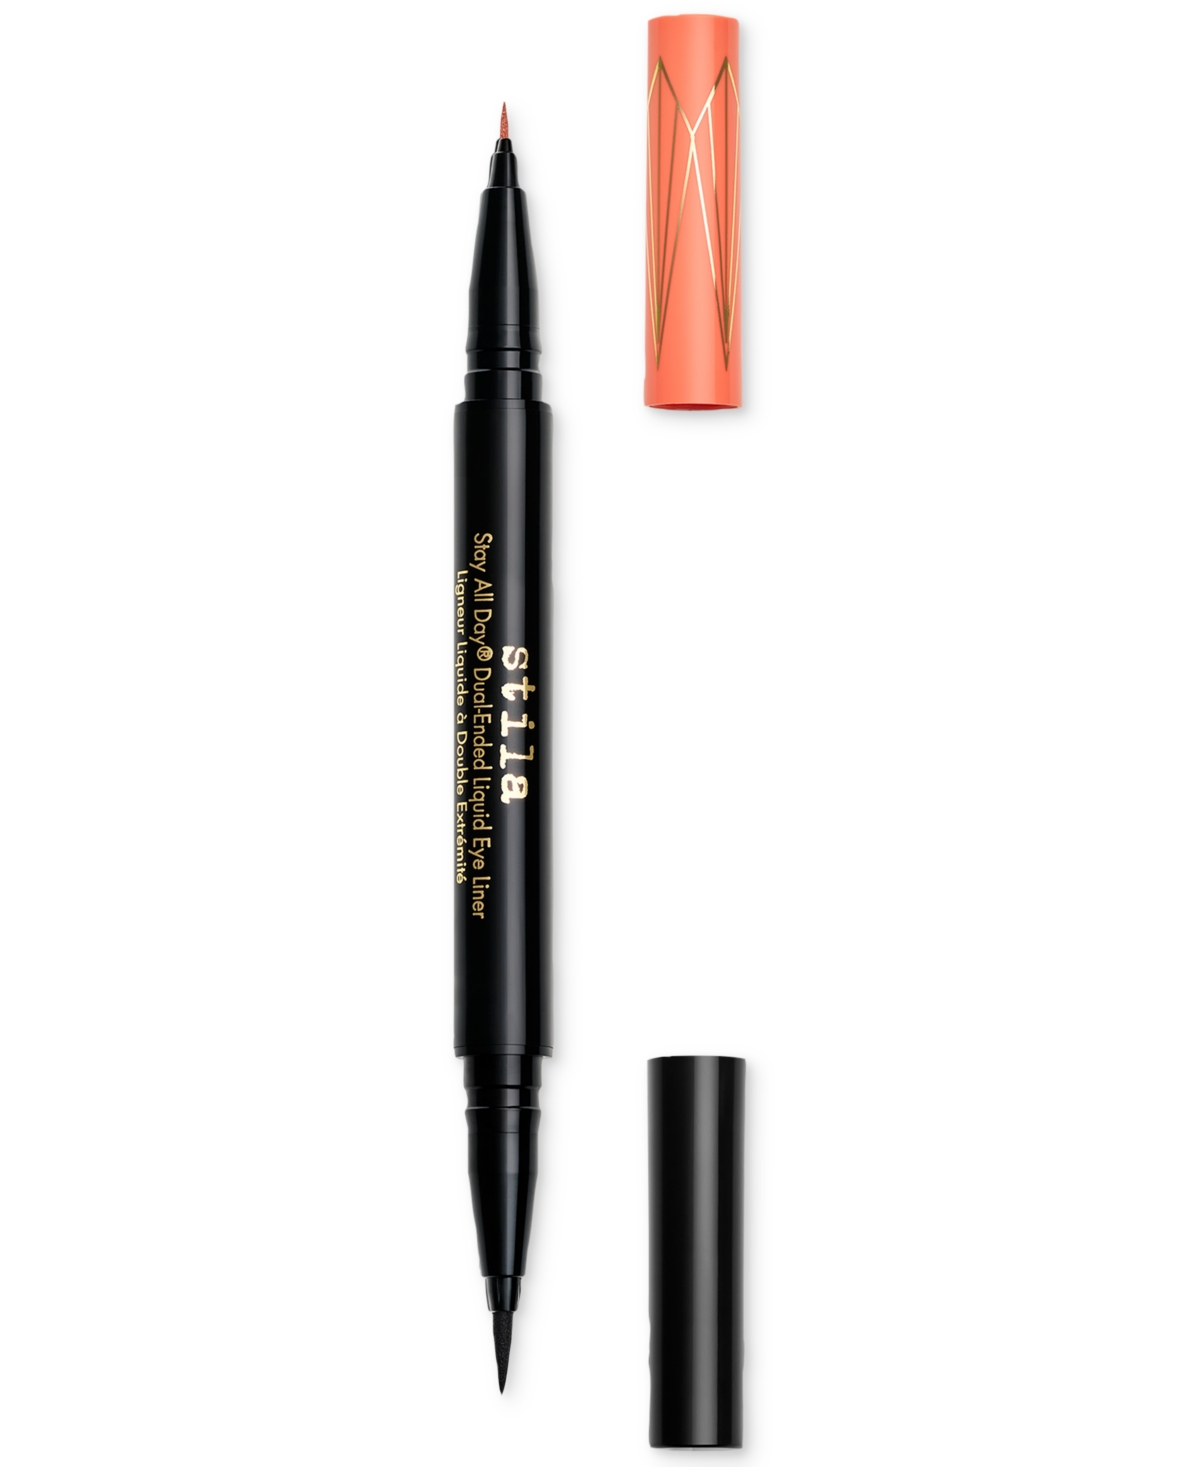 Stila Stay All Day Dual-ended Liquid Eye Liner In Tequila Sunrise